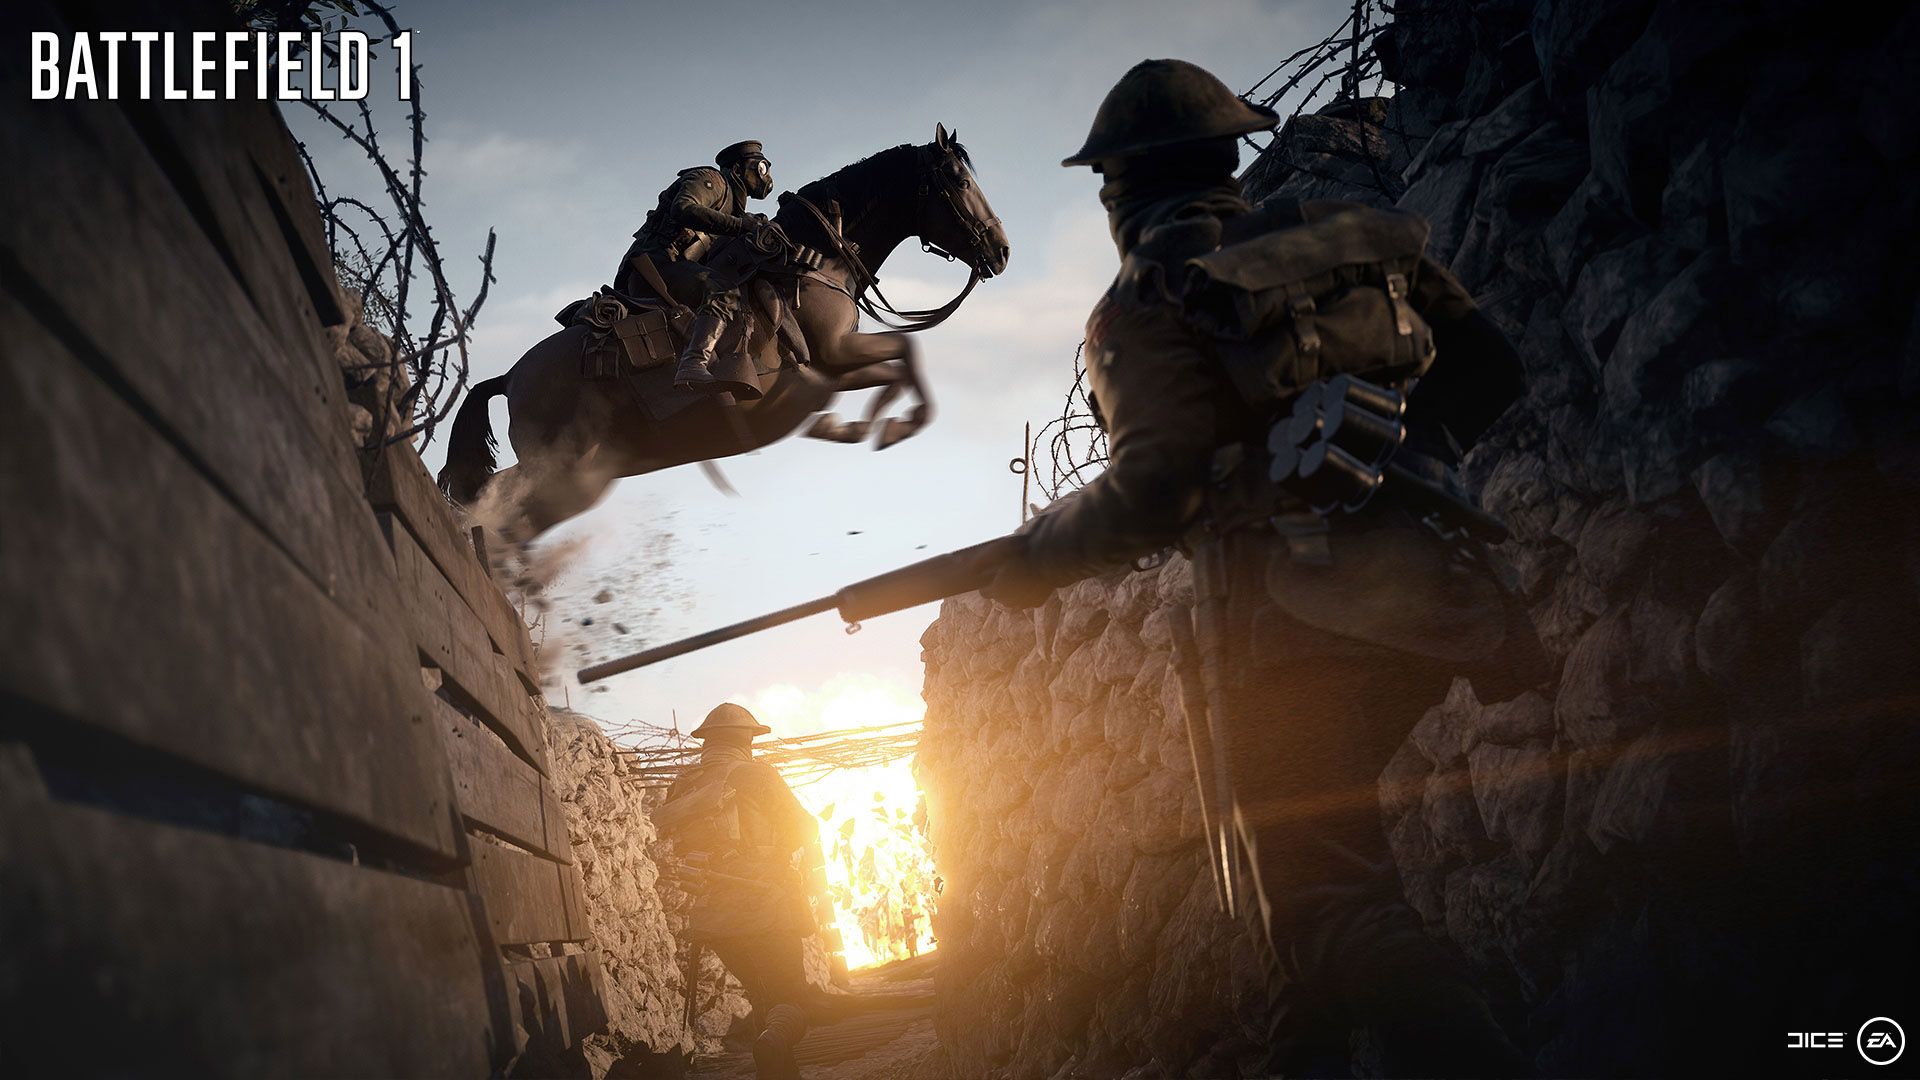 Battlefield 1 Review: Just What The Shooter Genre Needs